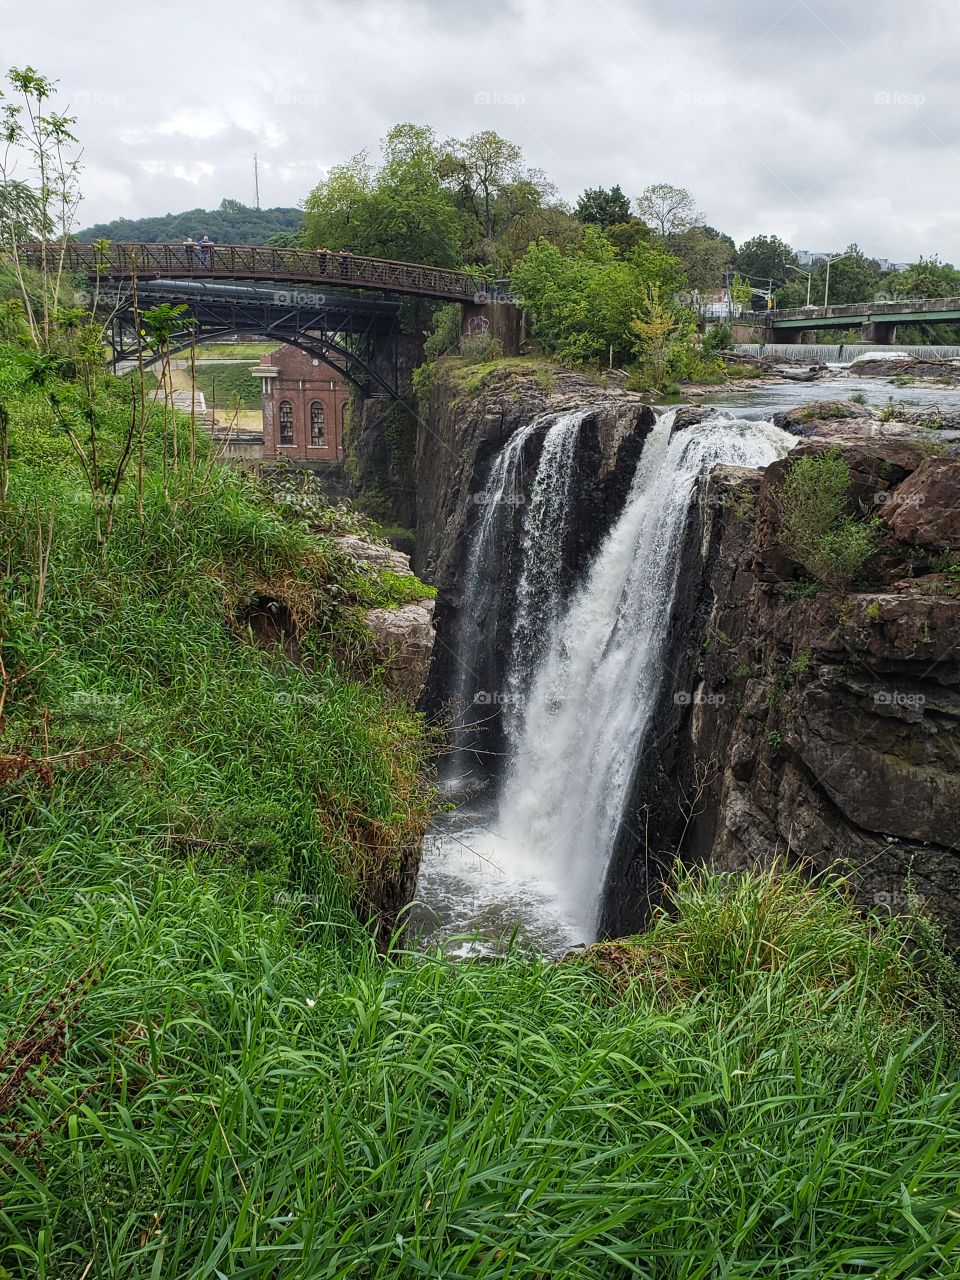 Great Falls of the Passaic River